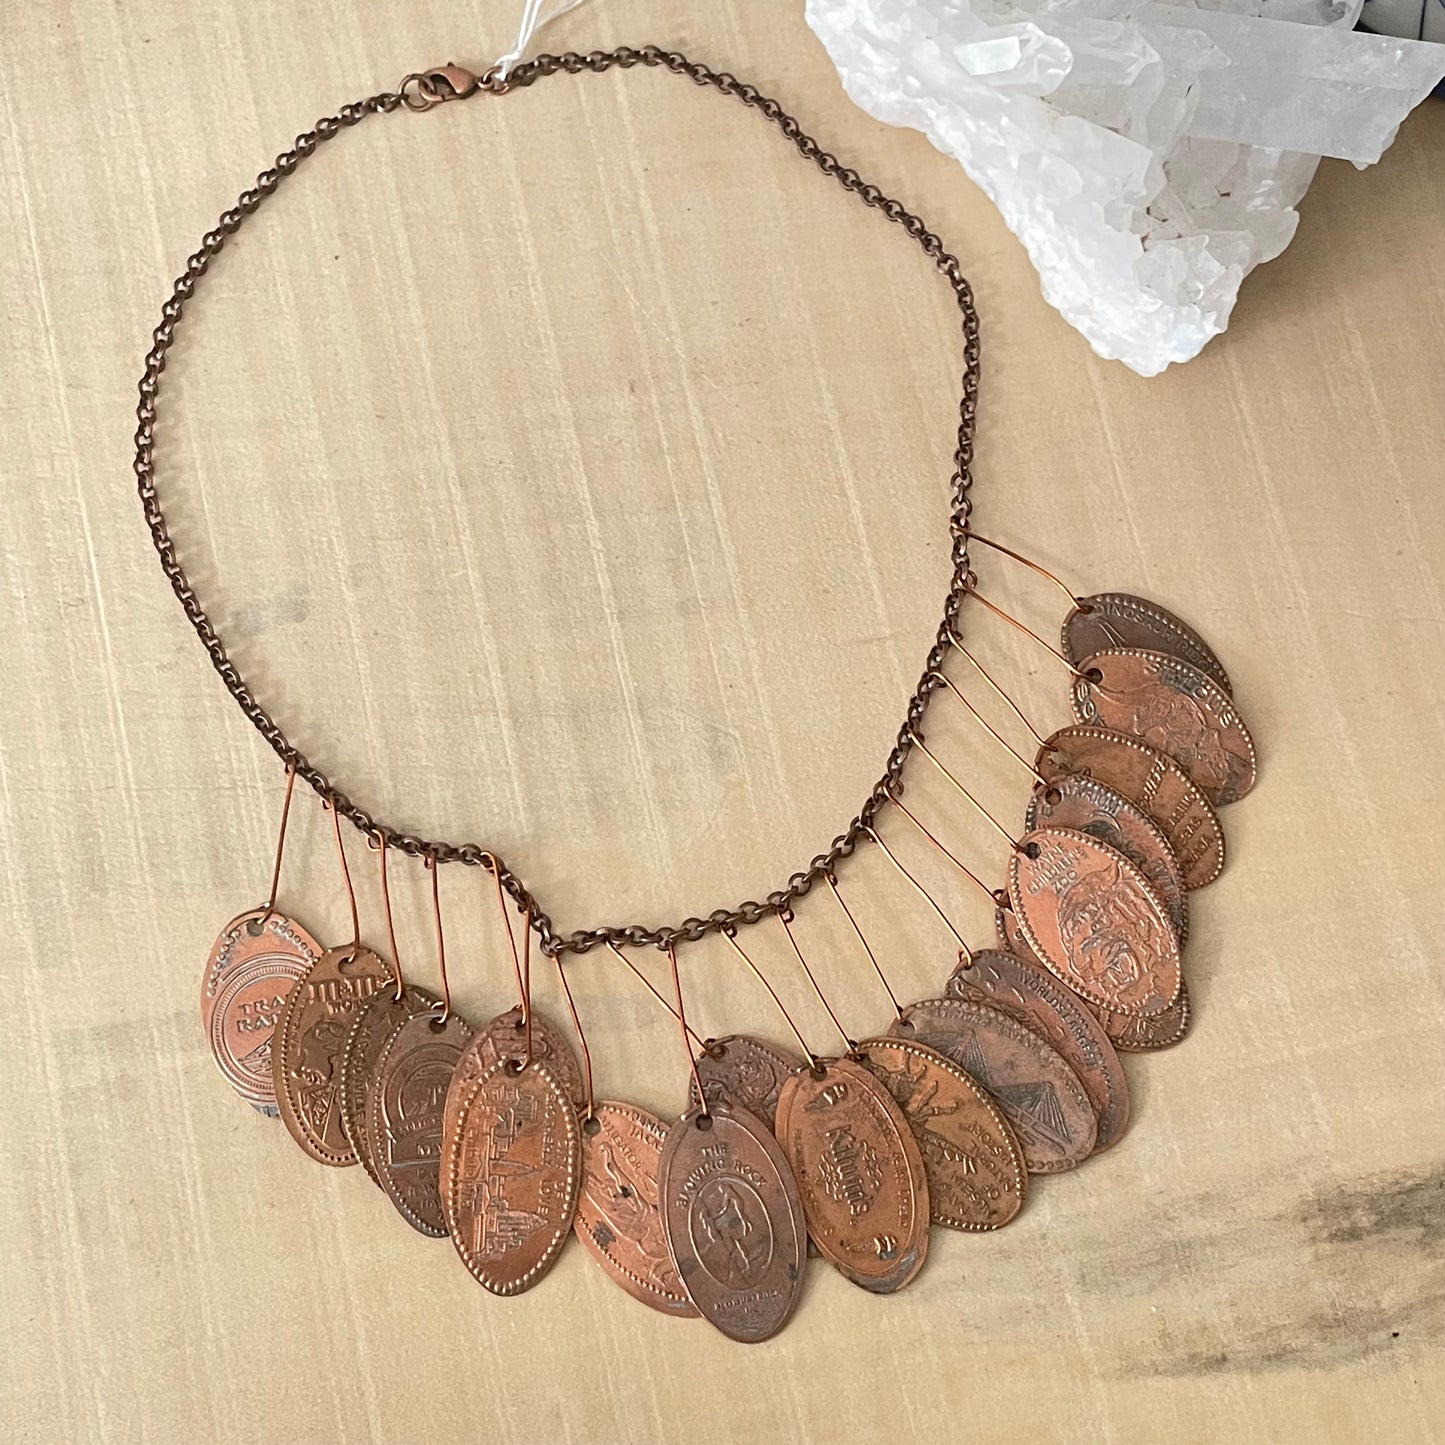 Unique Dangling Flattened Penny Statement Necklace 16.75" Drama Avant Garde Upcycled Industrial